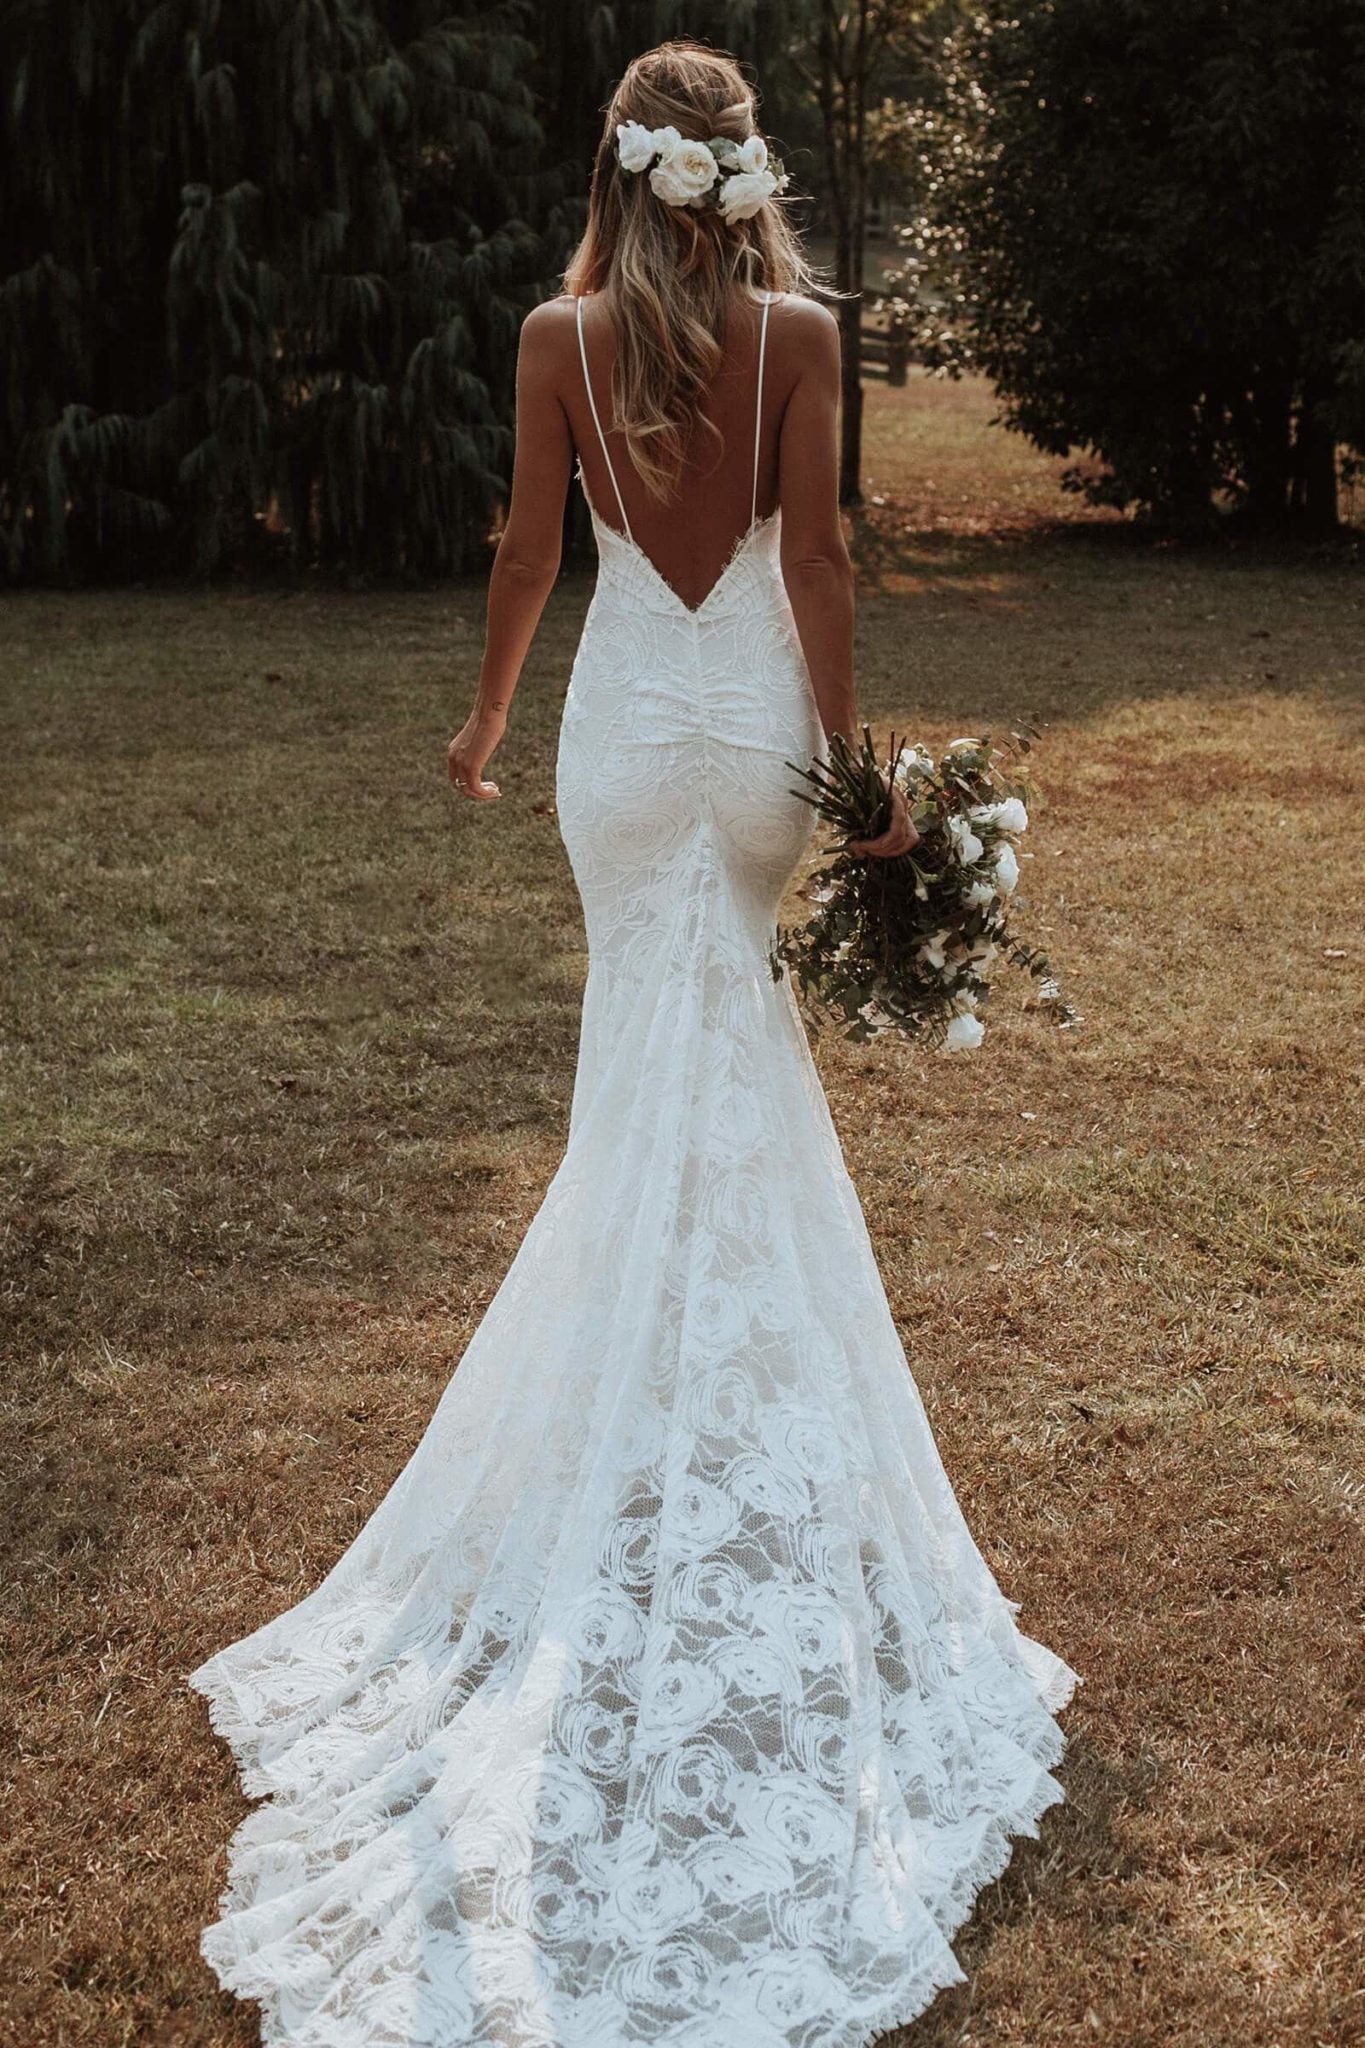 Choosing the Perfect White Lace Dress